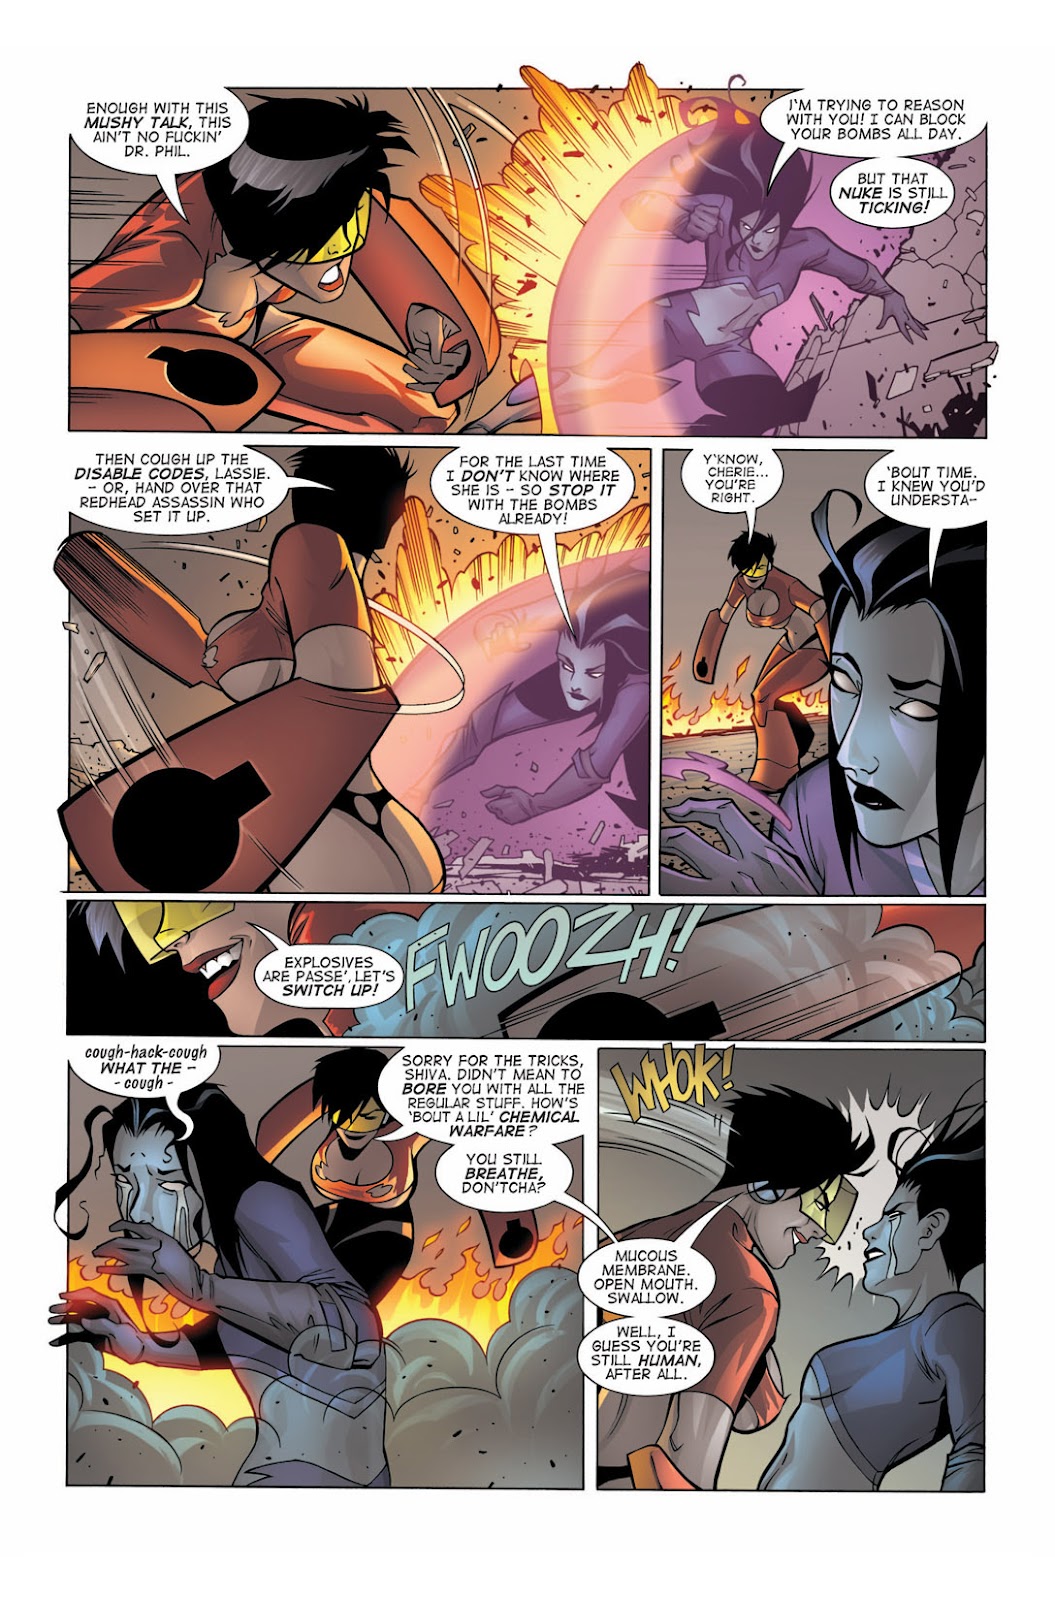 Bomb Queen III: The Good, The Bad & The Lovely issue 3 - Page 16